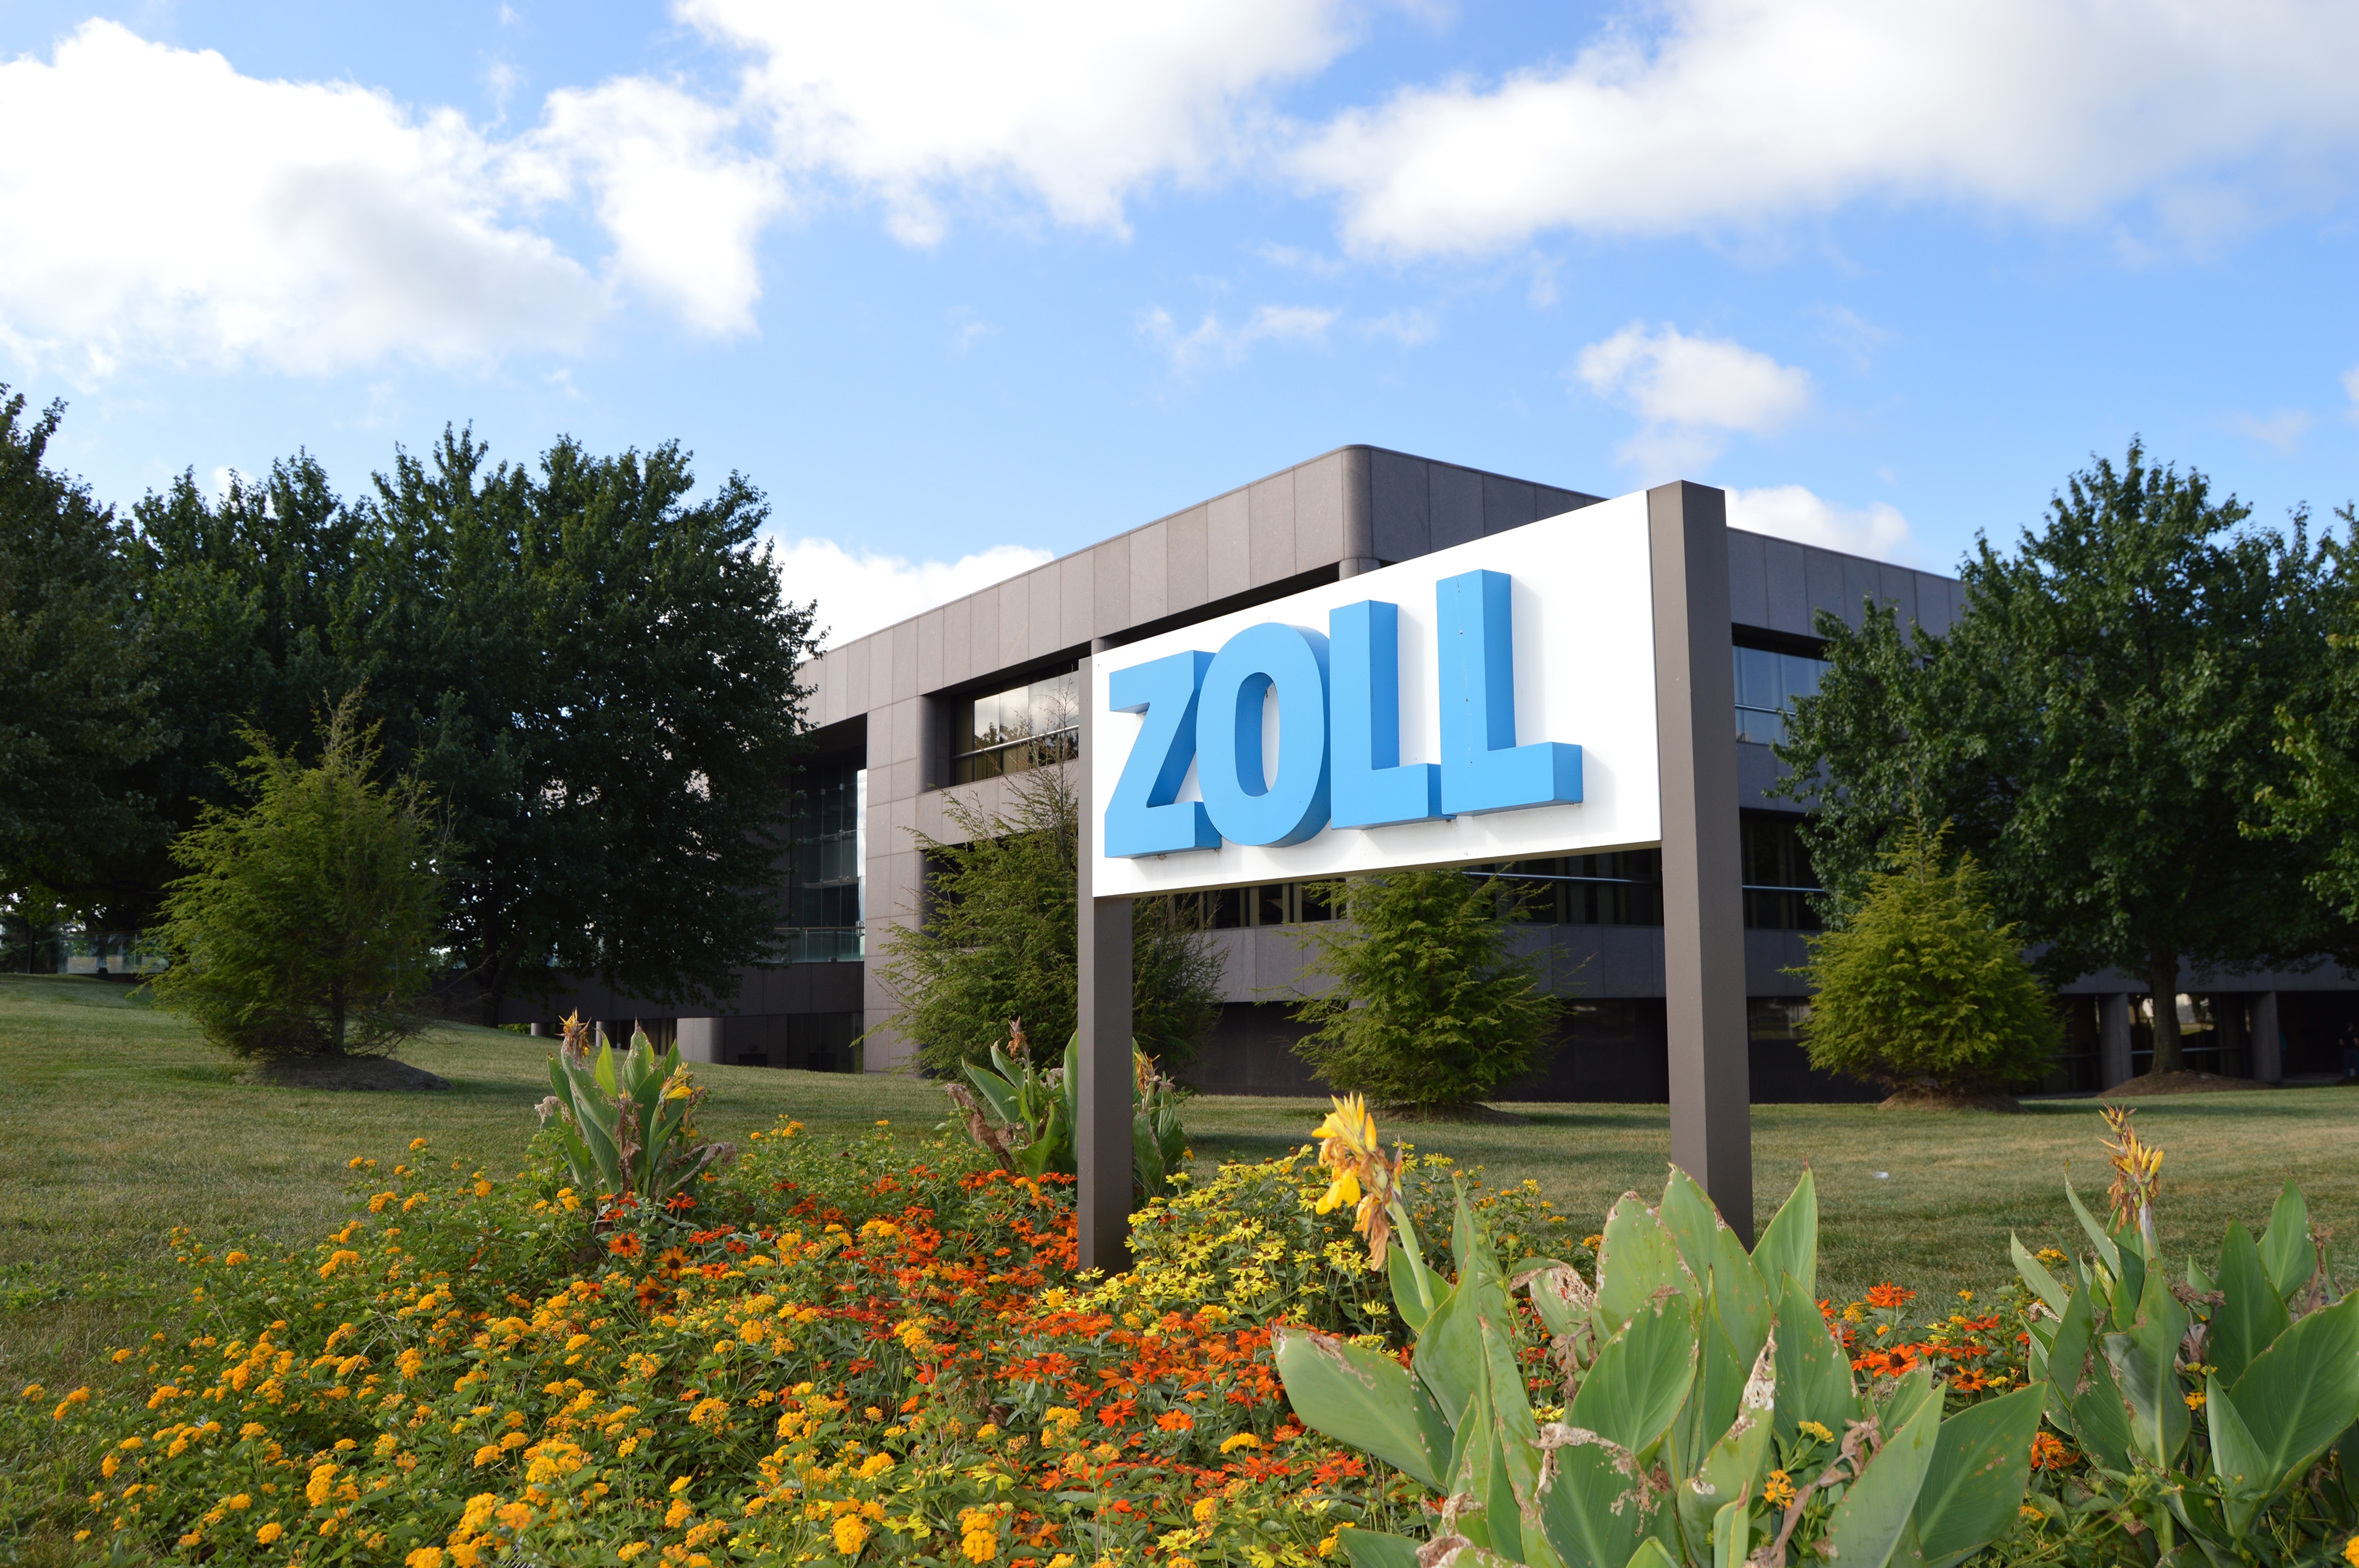 Zoll Medical sign and building